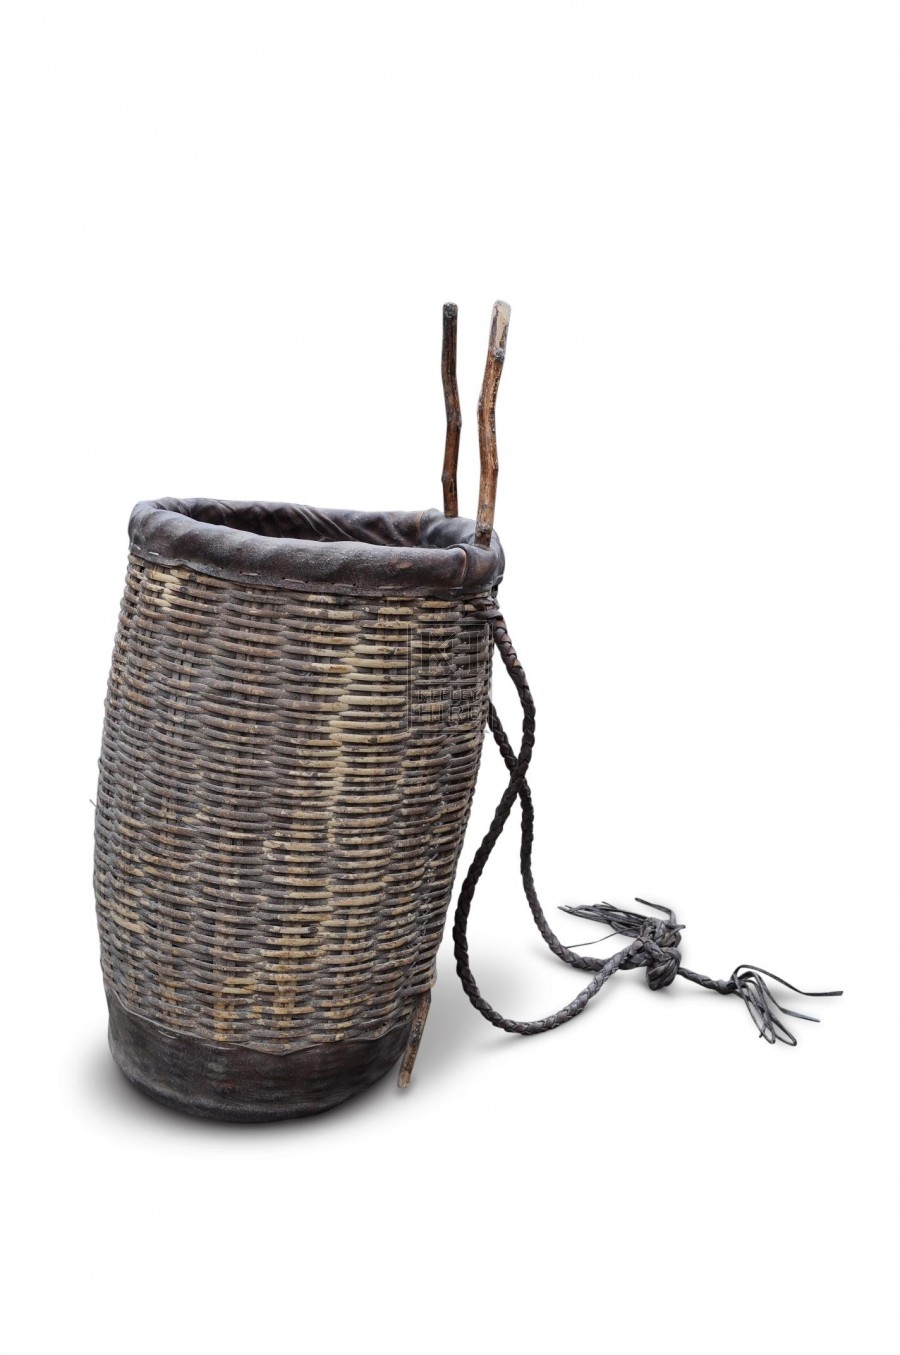 Wicker back basket with braided leather